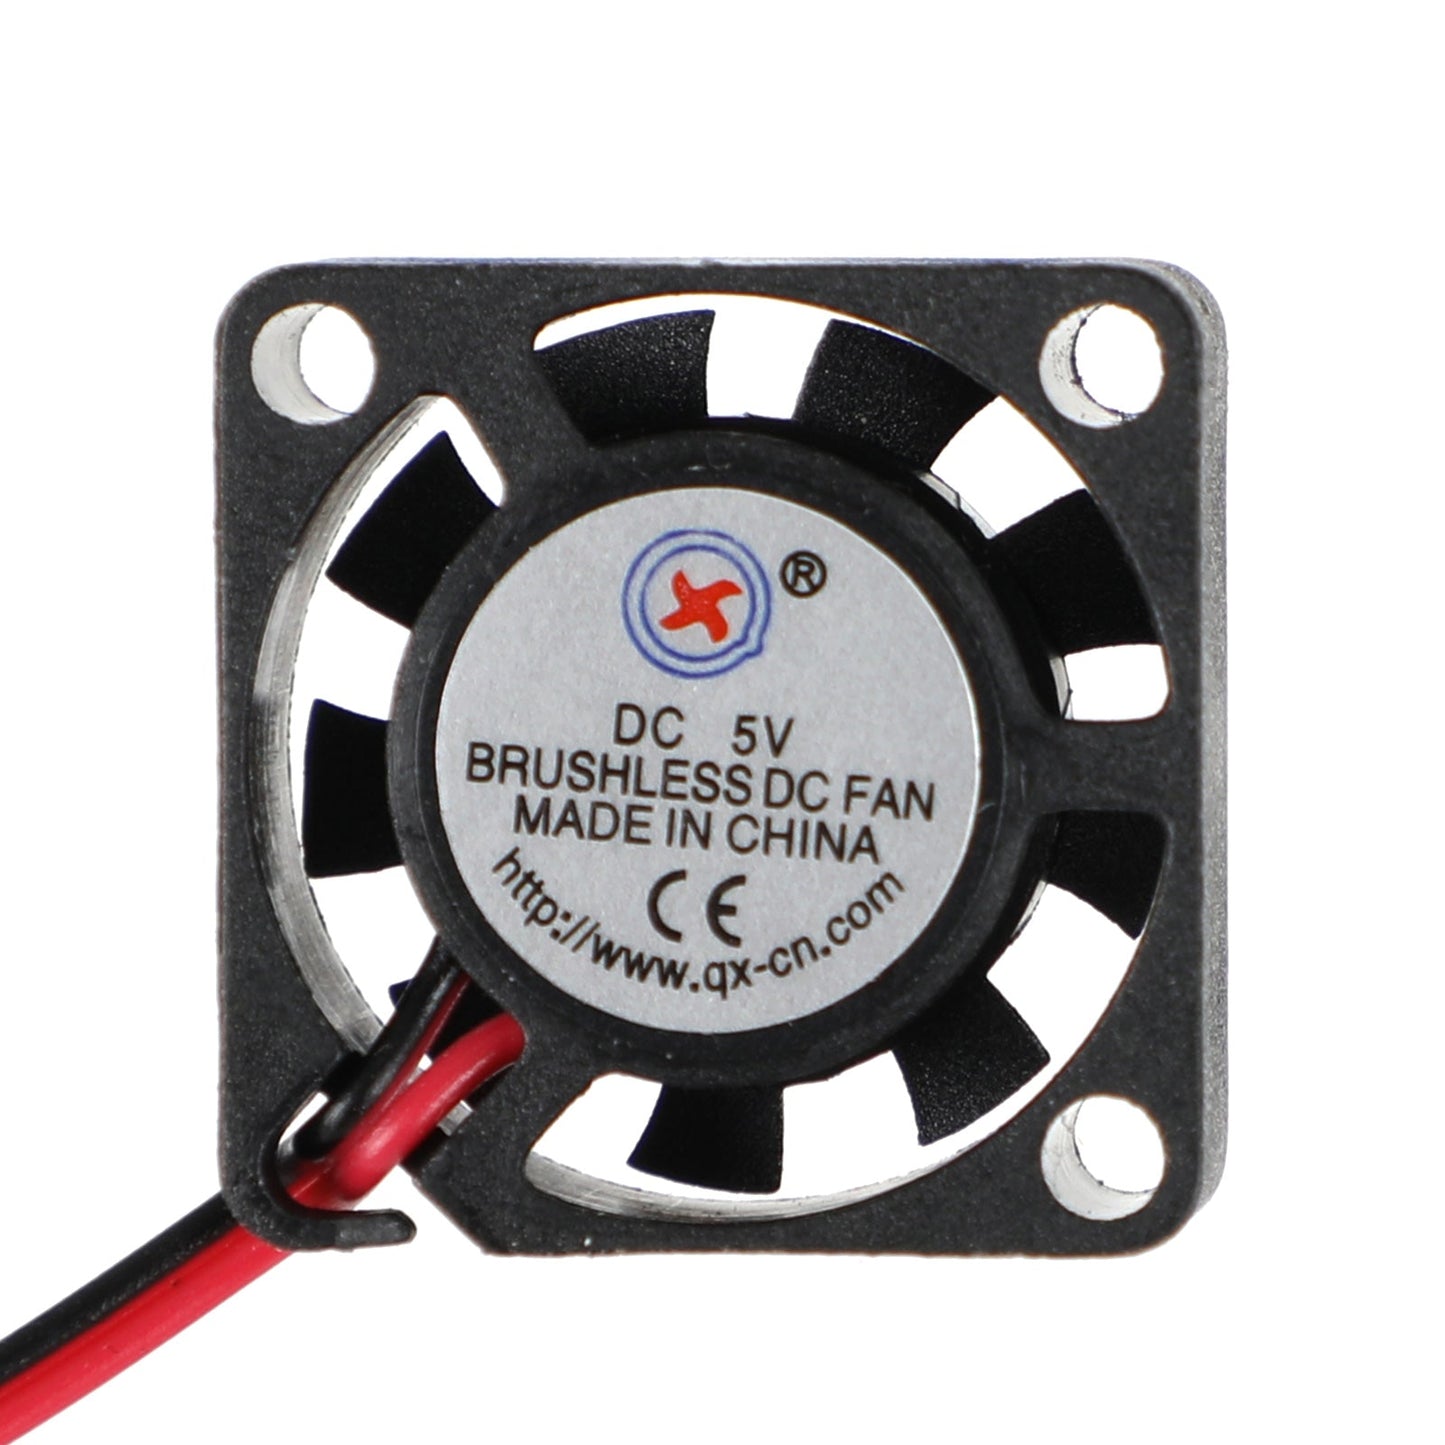 1Pc Brushless DC Cooling Blower Fan 5V 2006 20x20x6mm Sleeve 2 Pin Wire